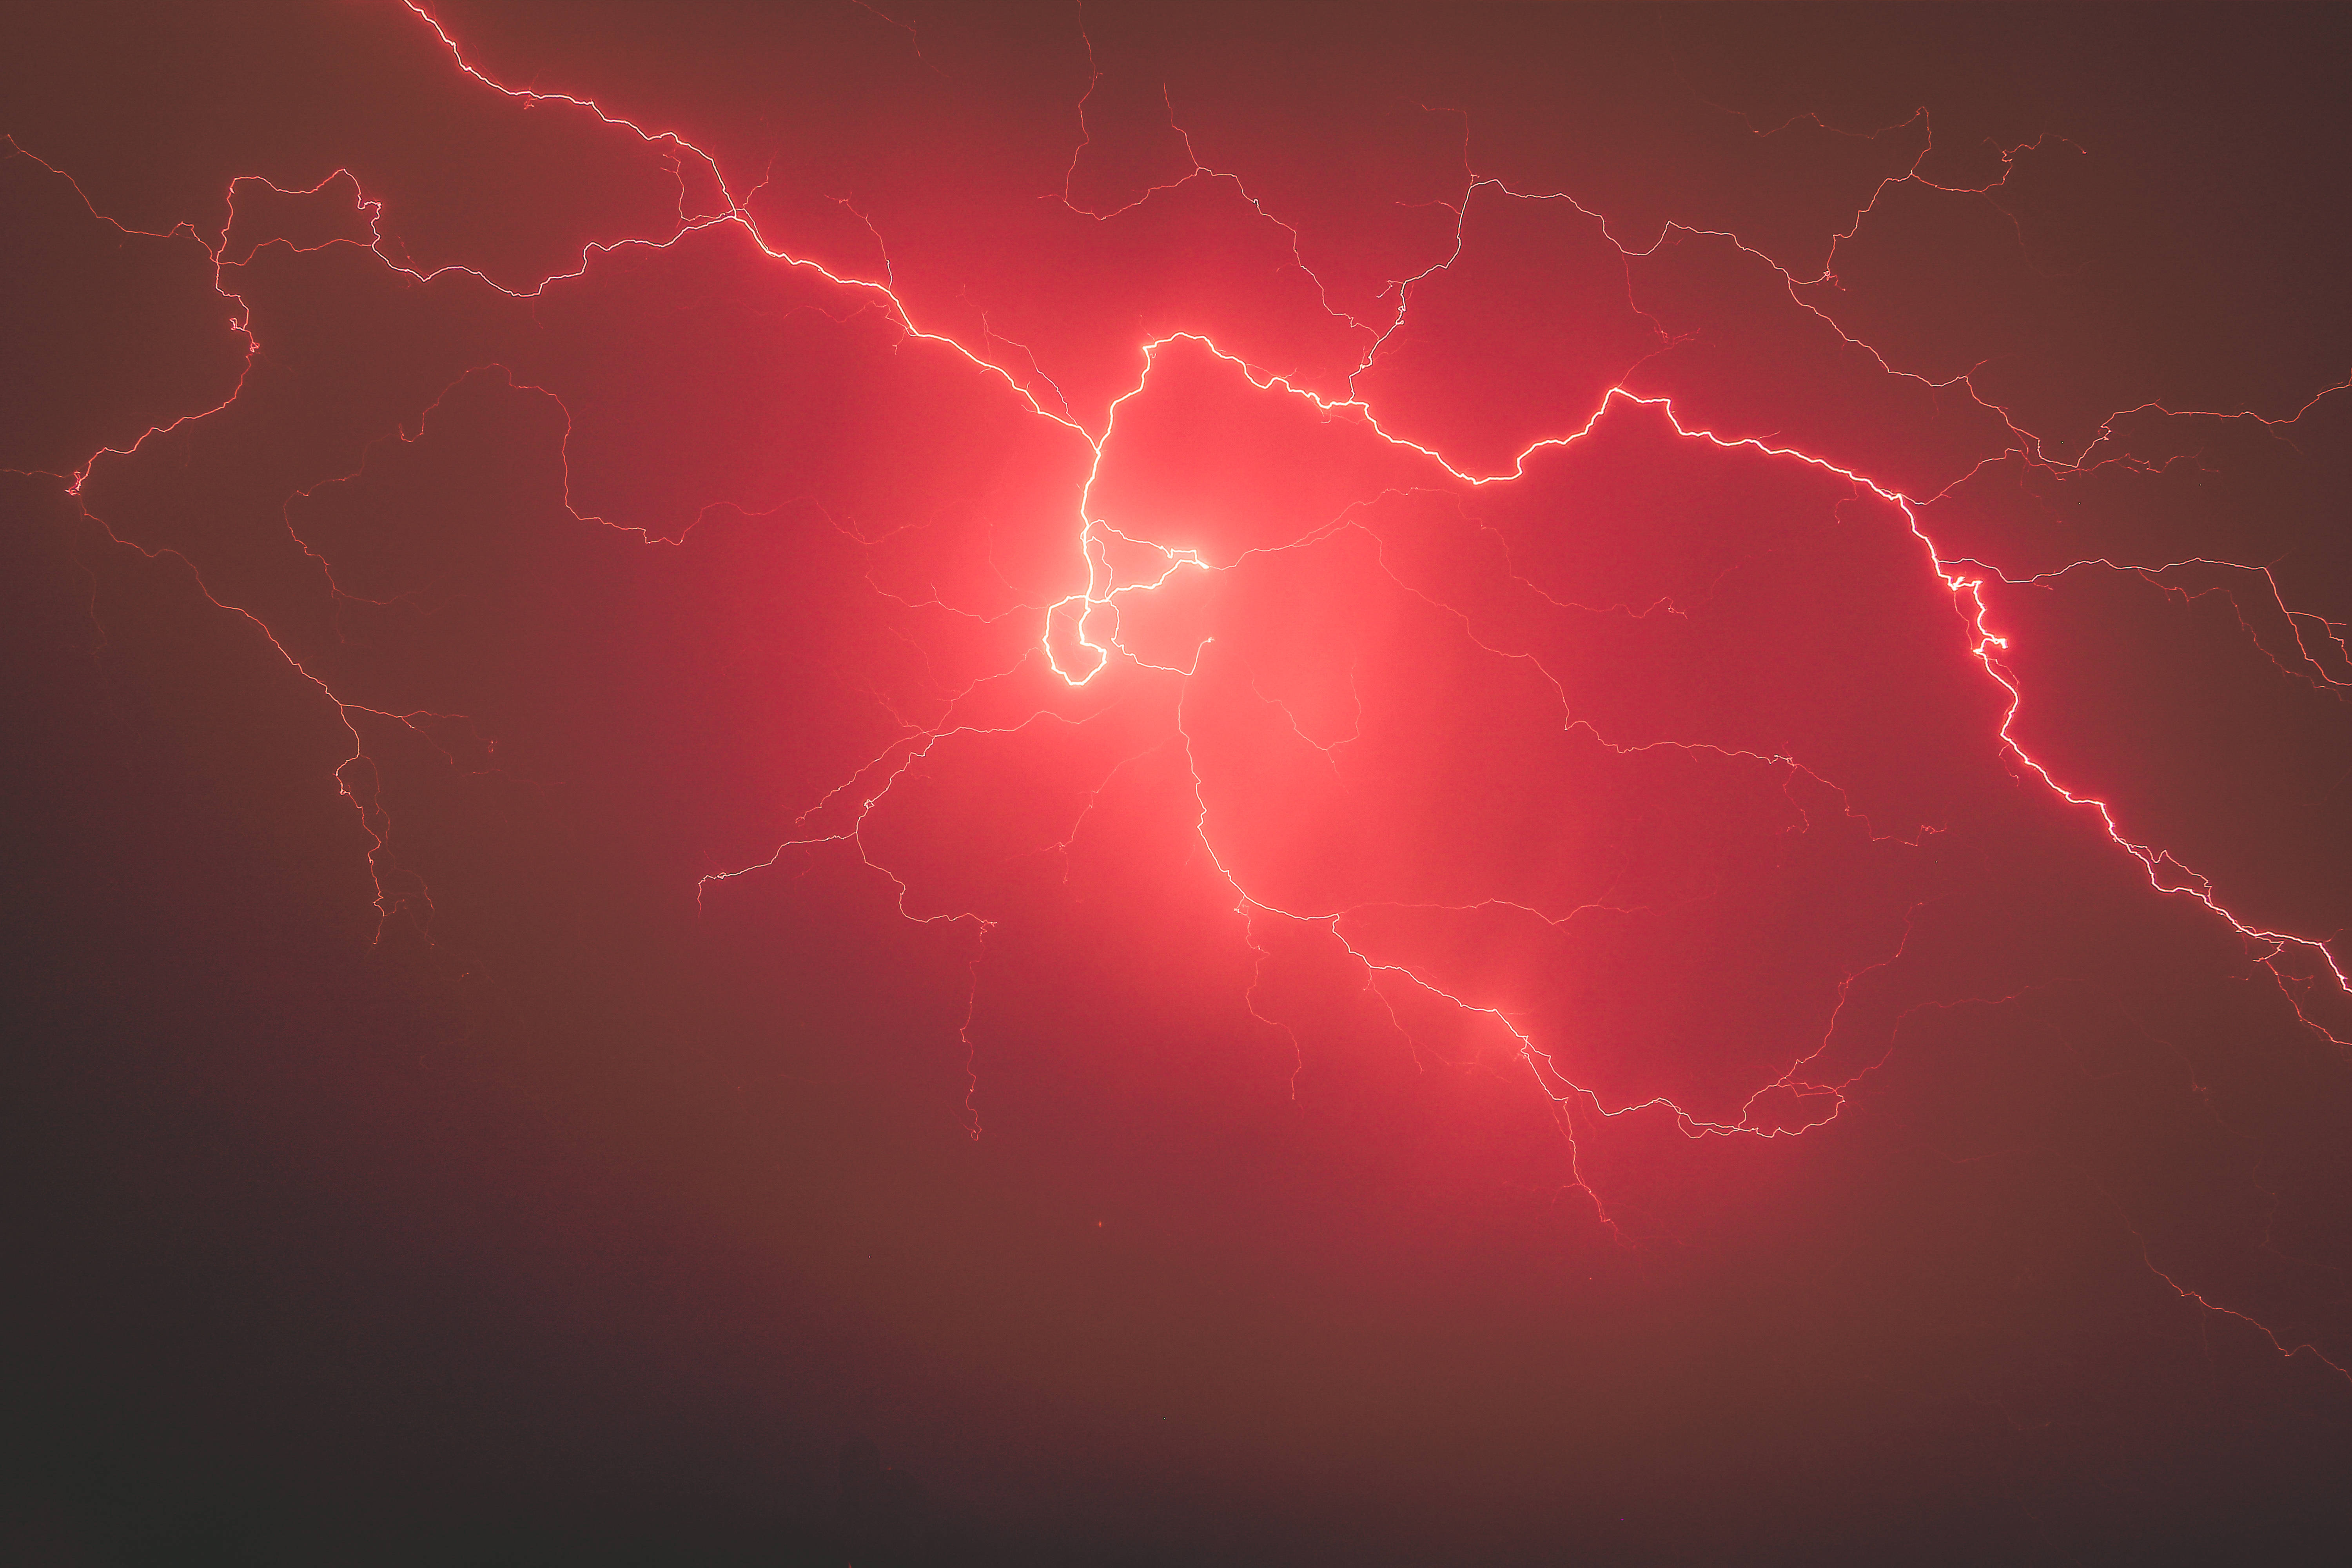 Download "A Powerful Display of Red Lightning" Wallpaper